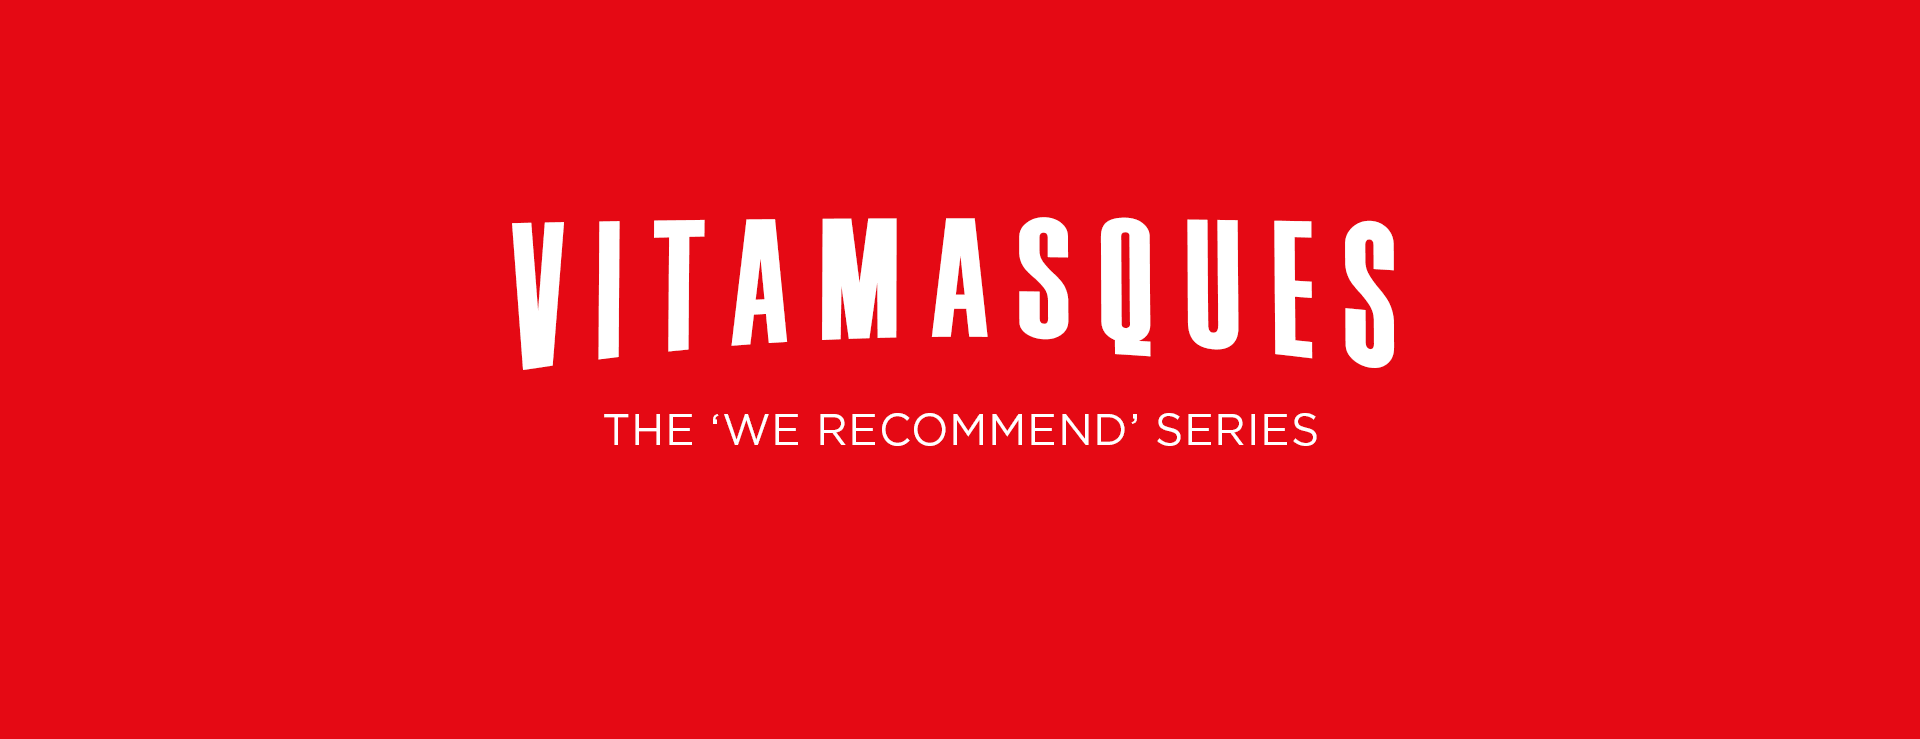 5 Korean Shows To Watch On Netflix: Let's Do This - Vitamasques